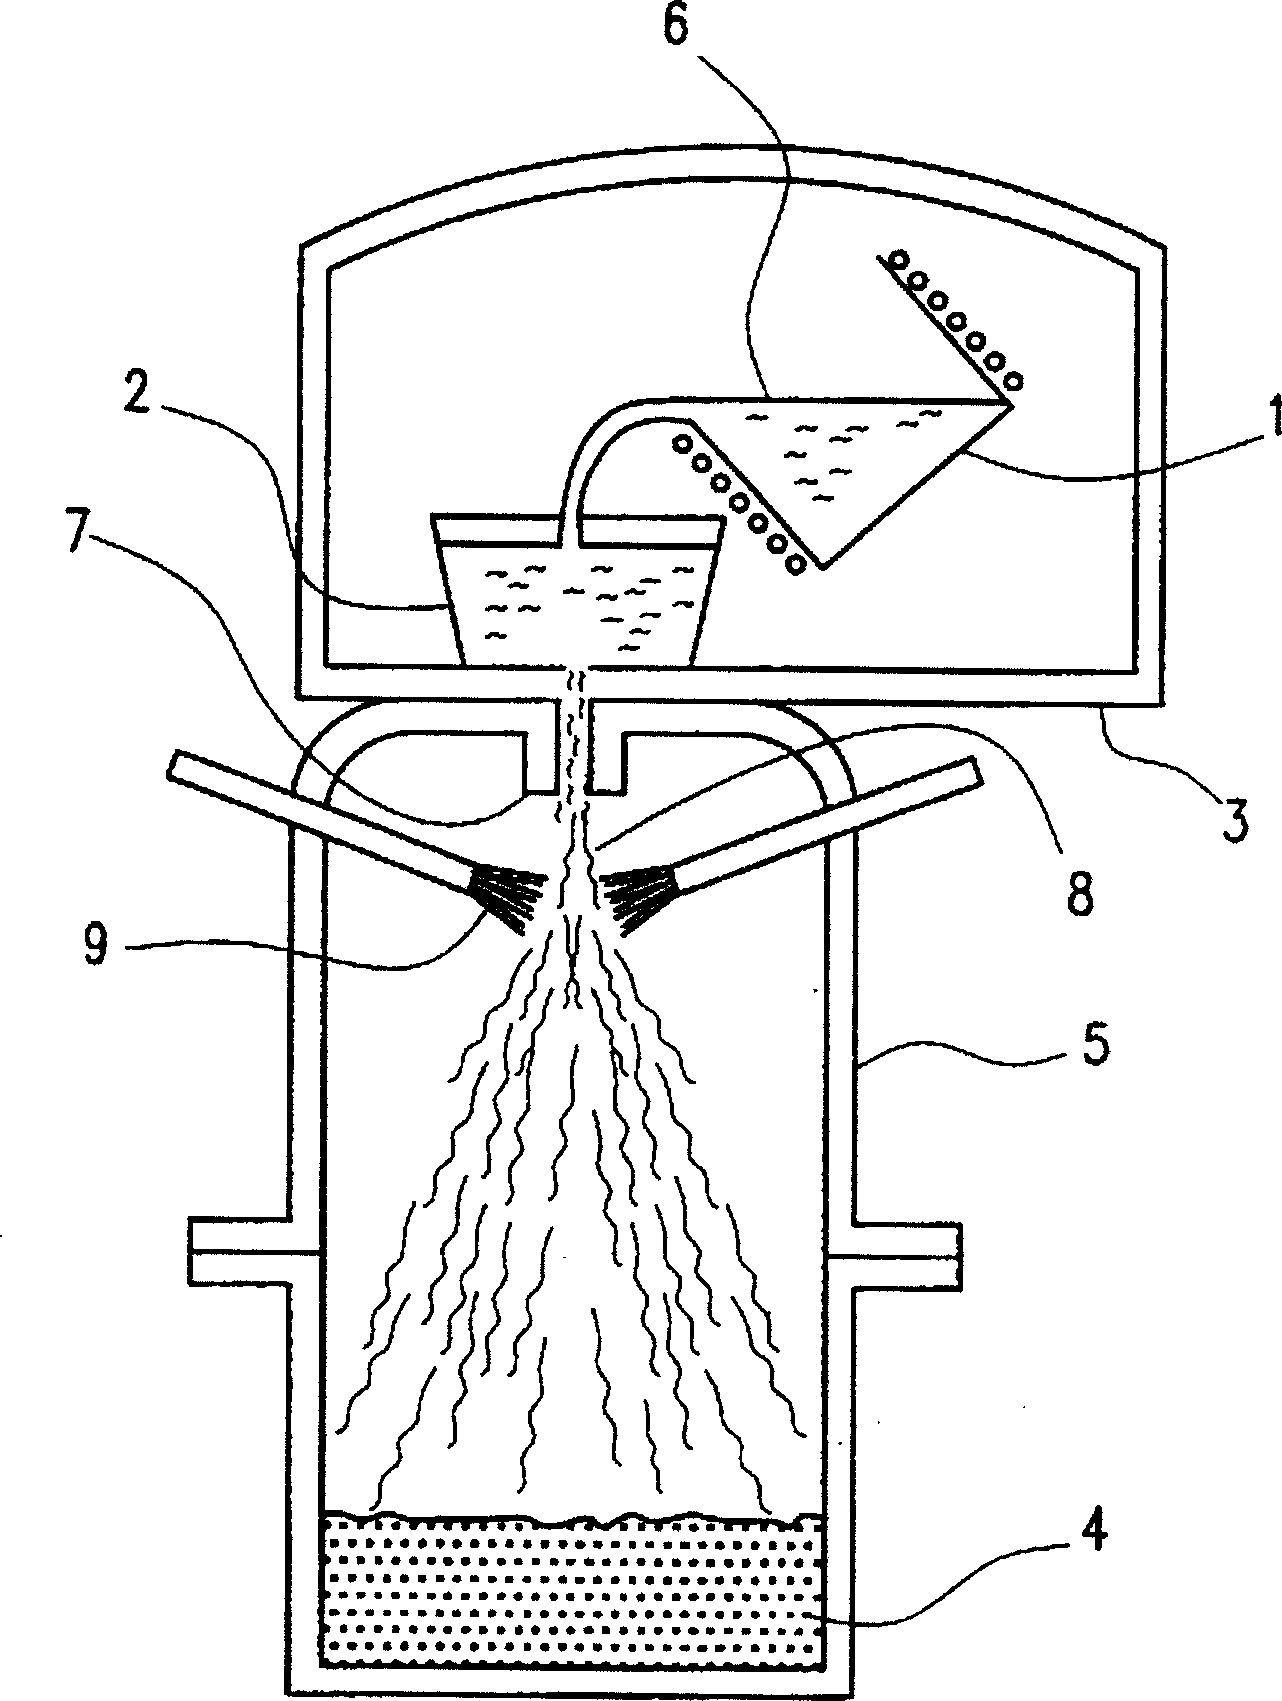 Magnetic alloy powder for permanent magnet and manufacturing method thereof